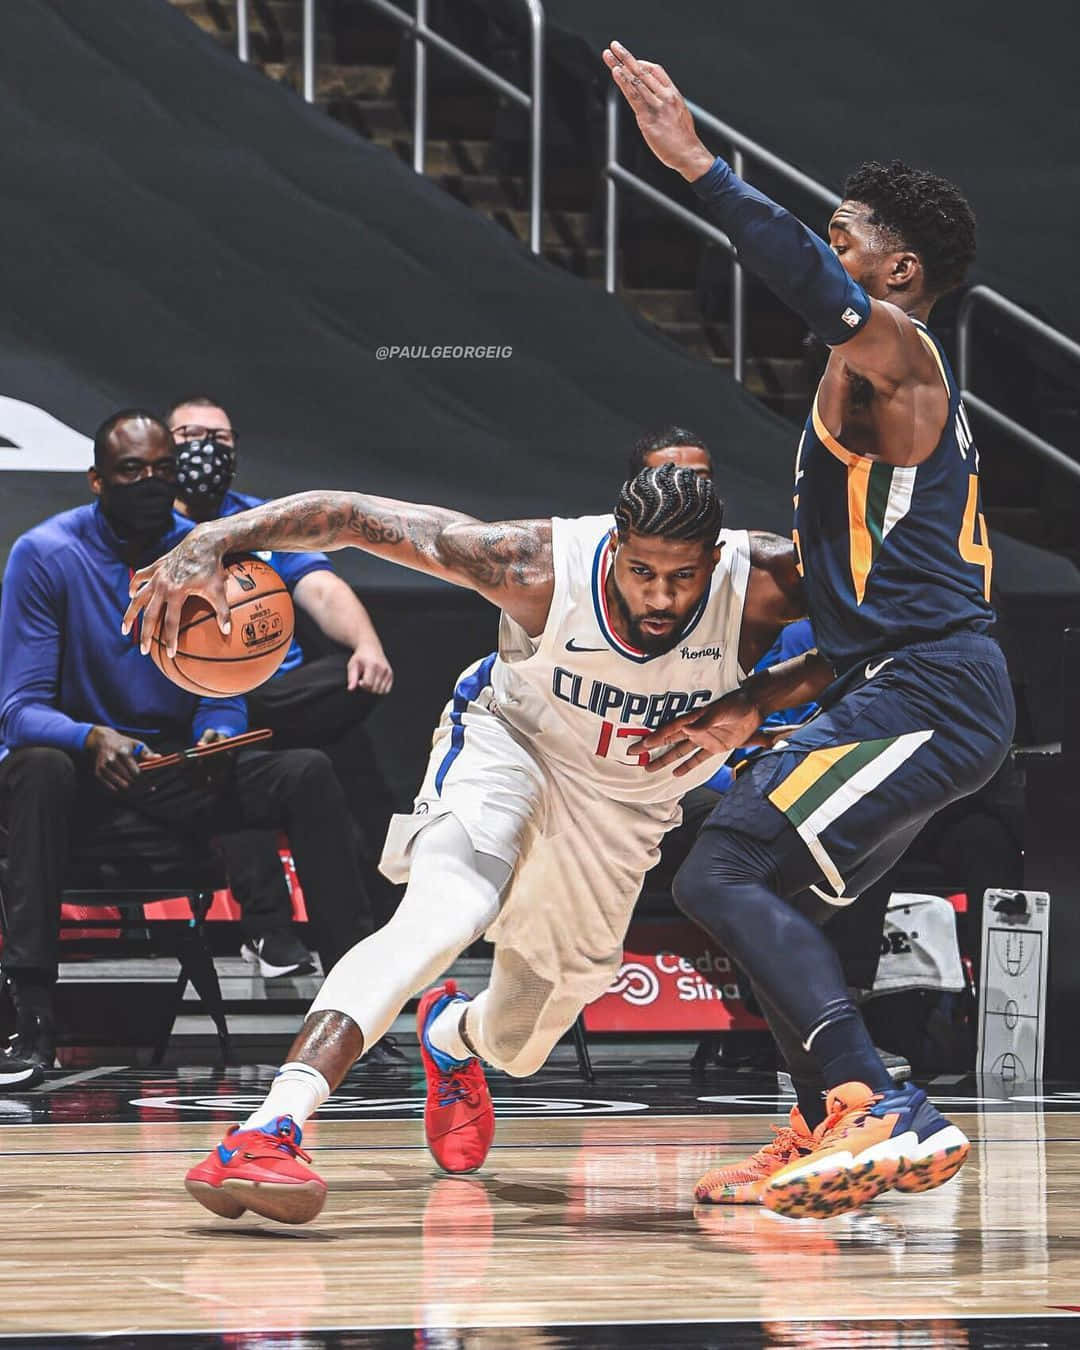 Paul George Clippers In Action Wallpaper